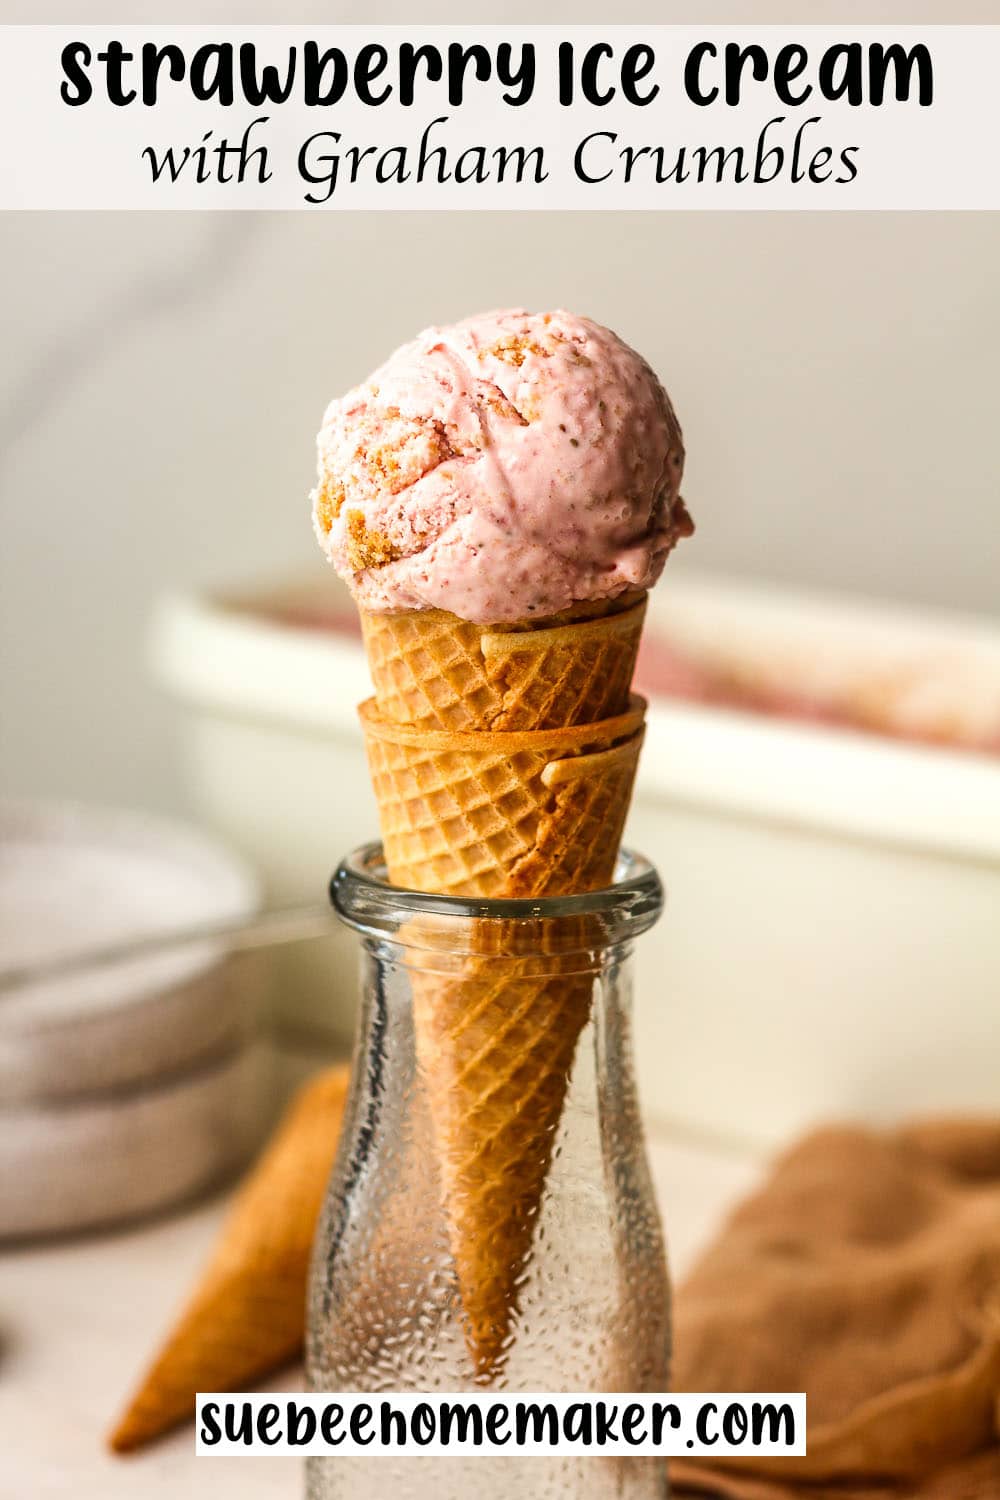 Side view of a strawberry ice cream cone with graham crumbles.